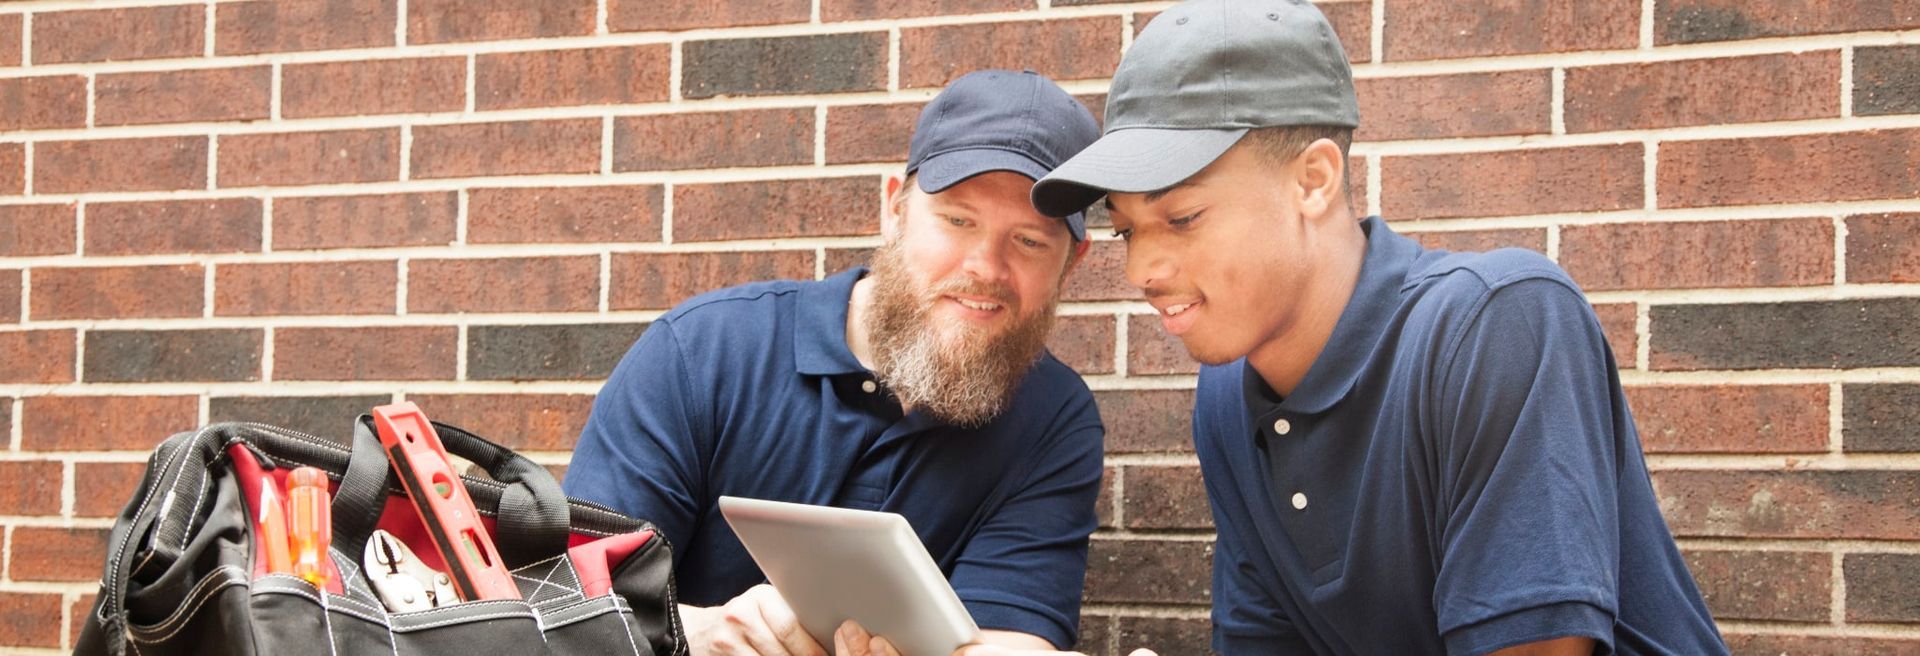 two men are looking at a tablet in front of a brick wall .